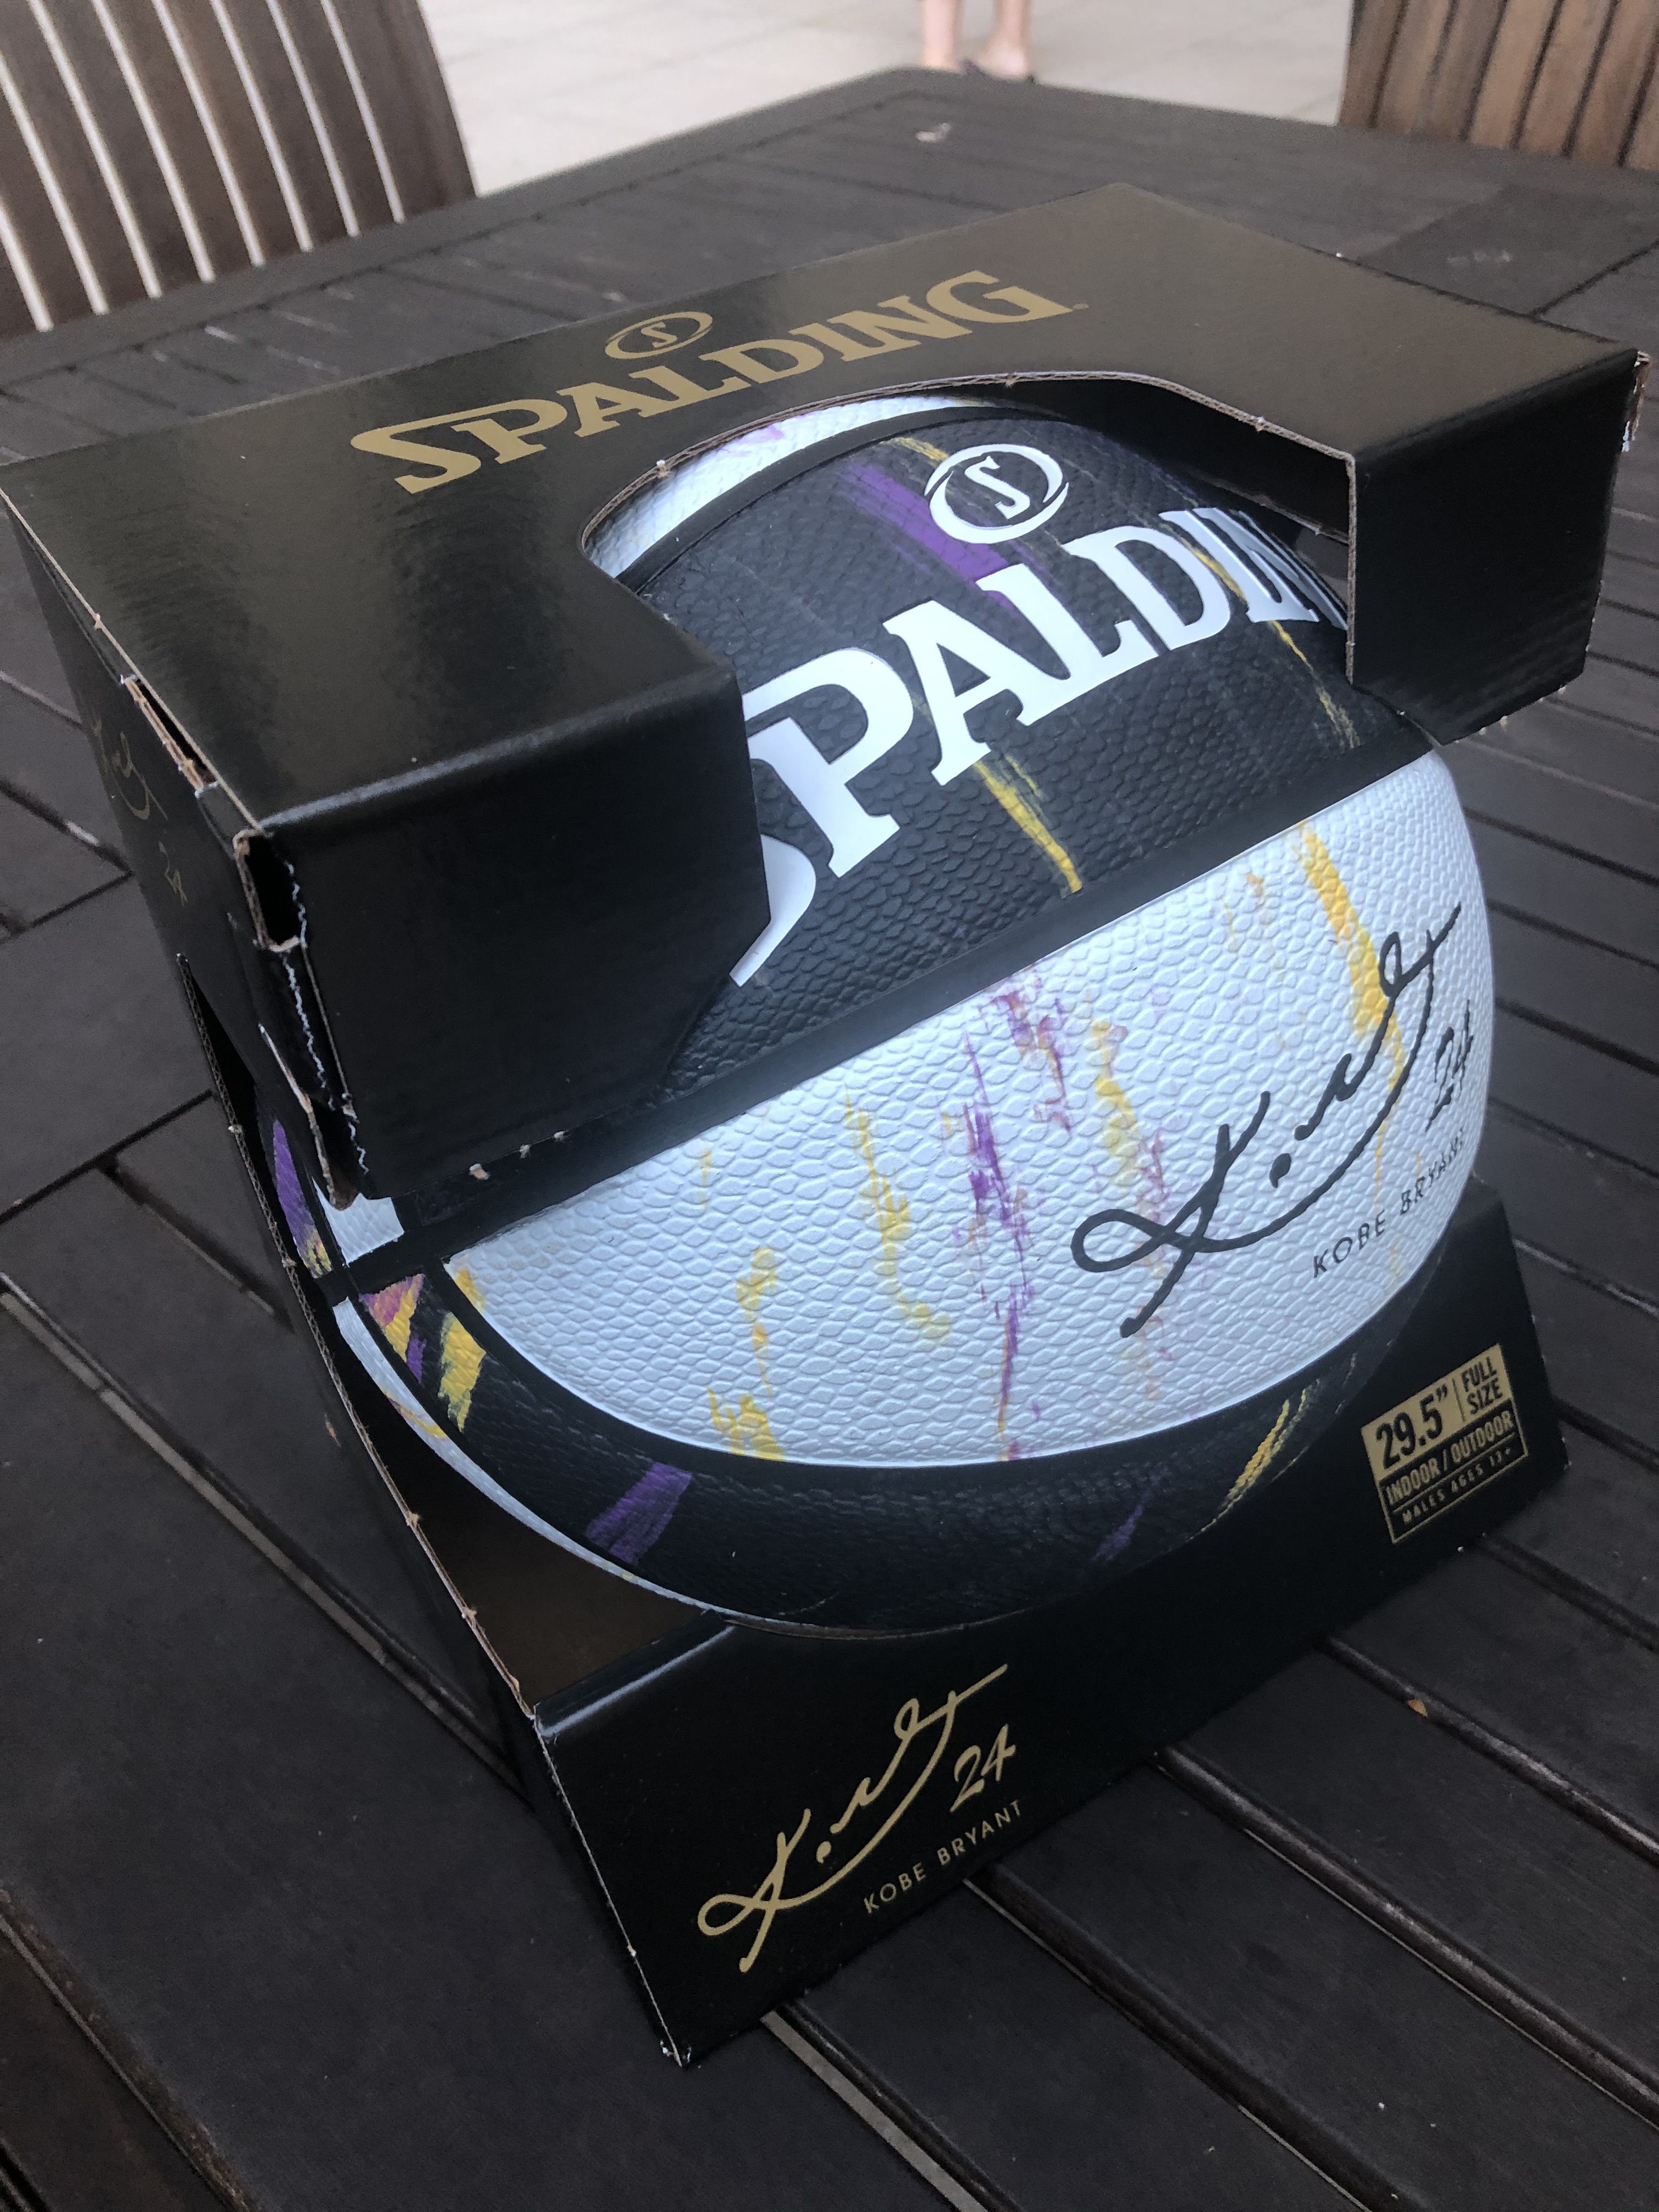 Spalding Kobe Bryant 24 Marbled Snake Limited Edition Basketball Rare Sold Out! 